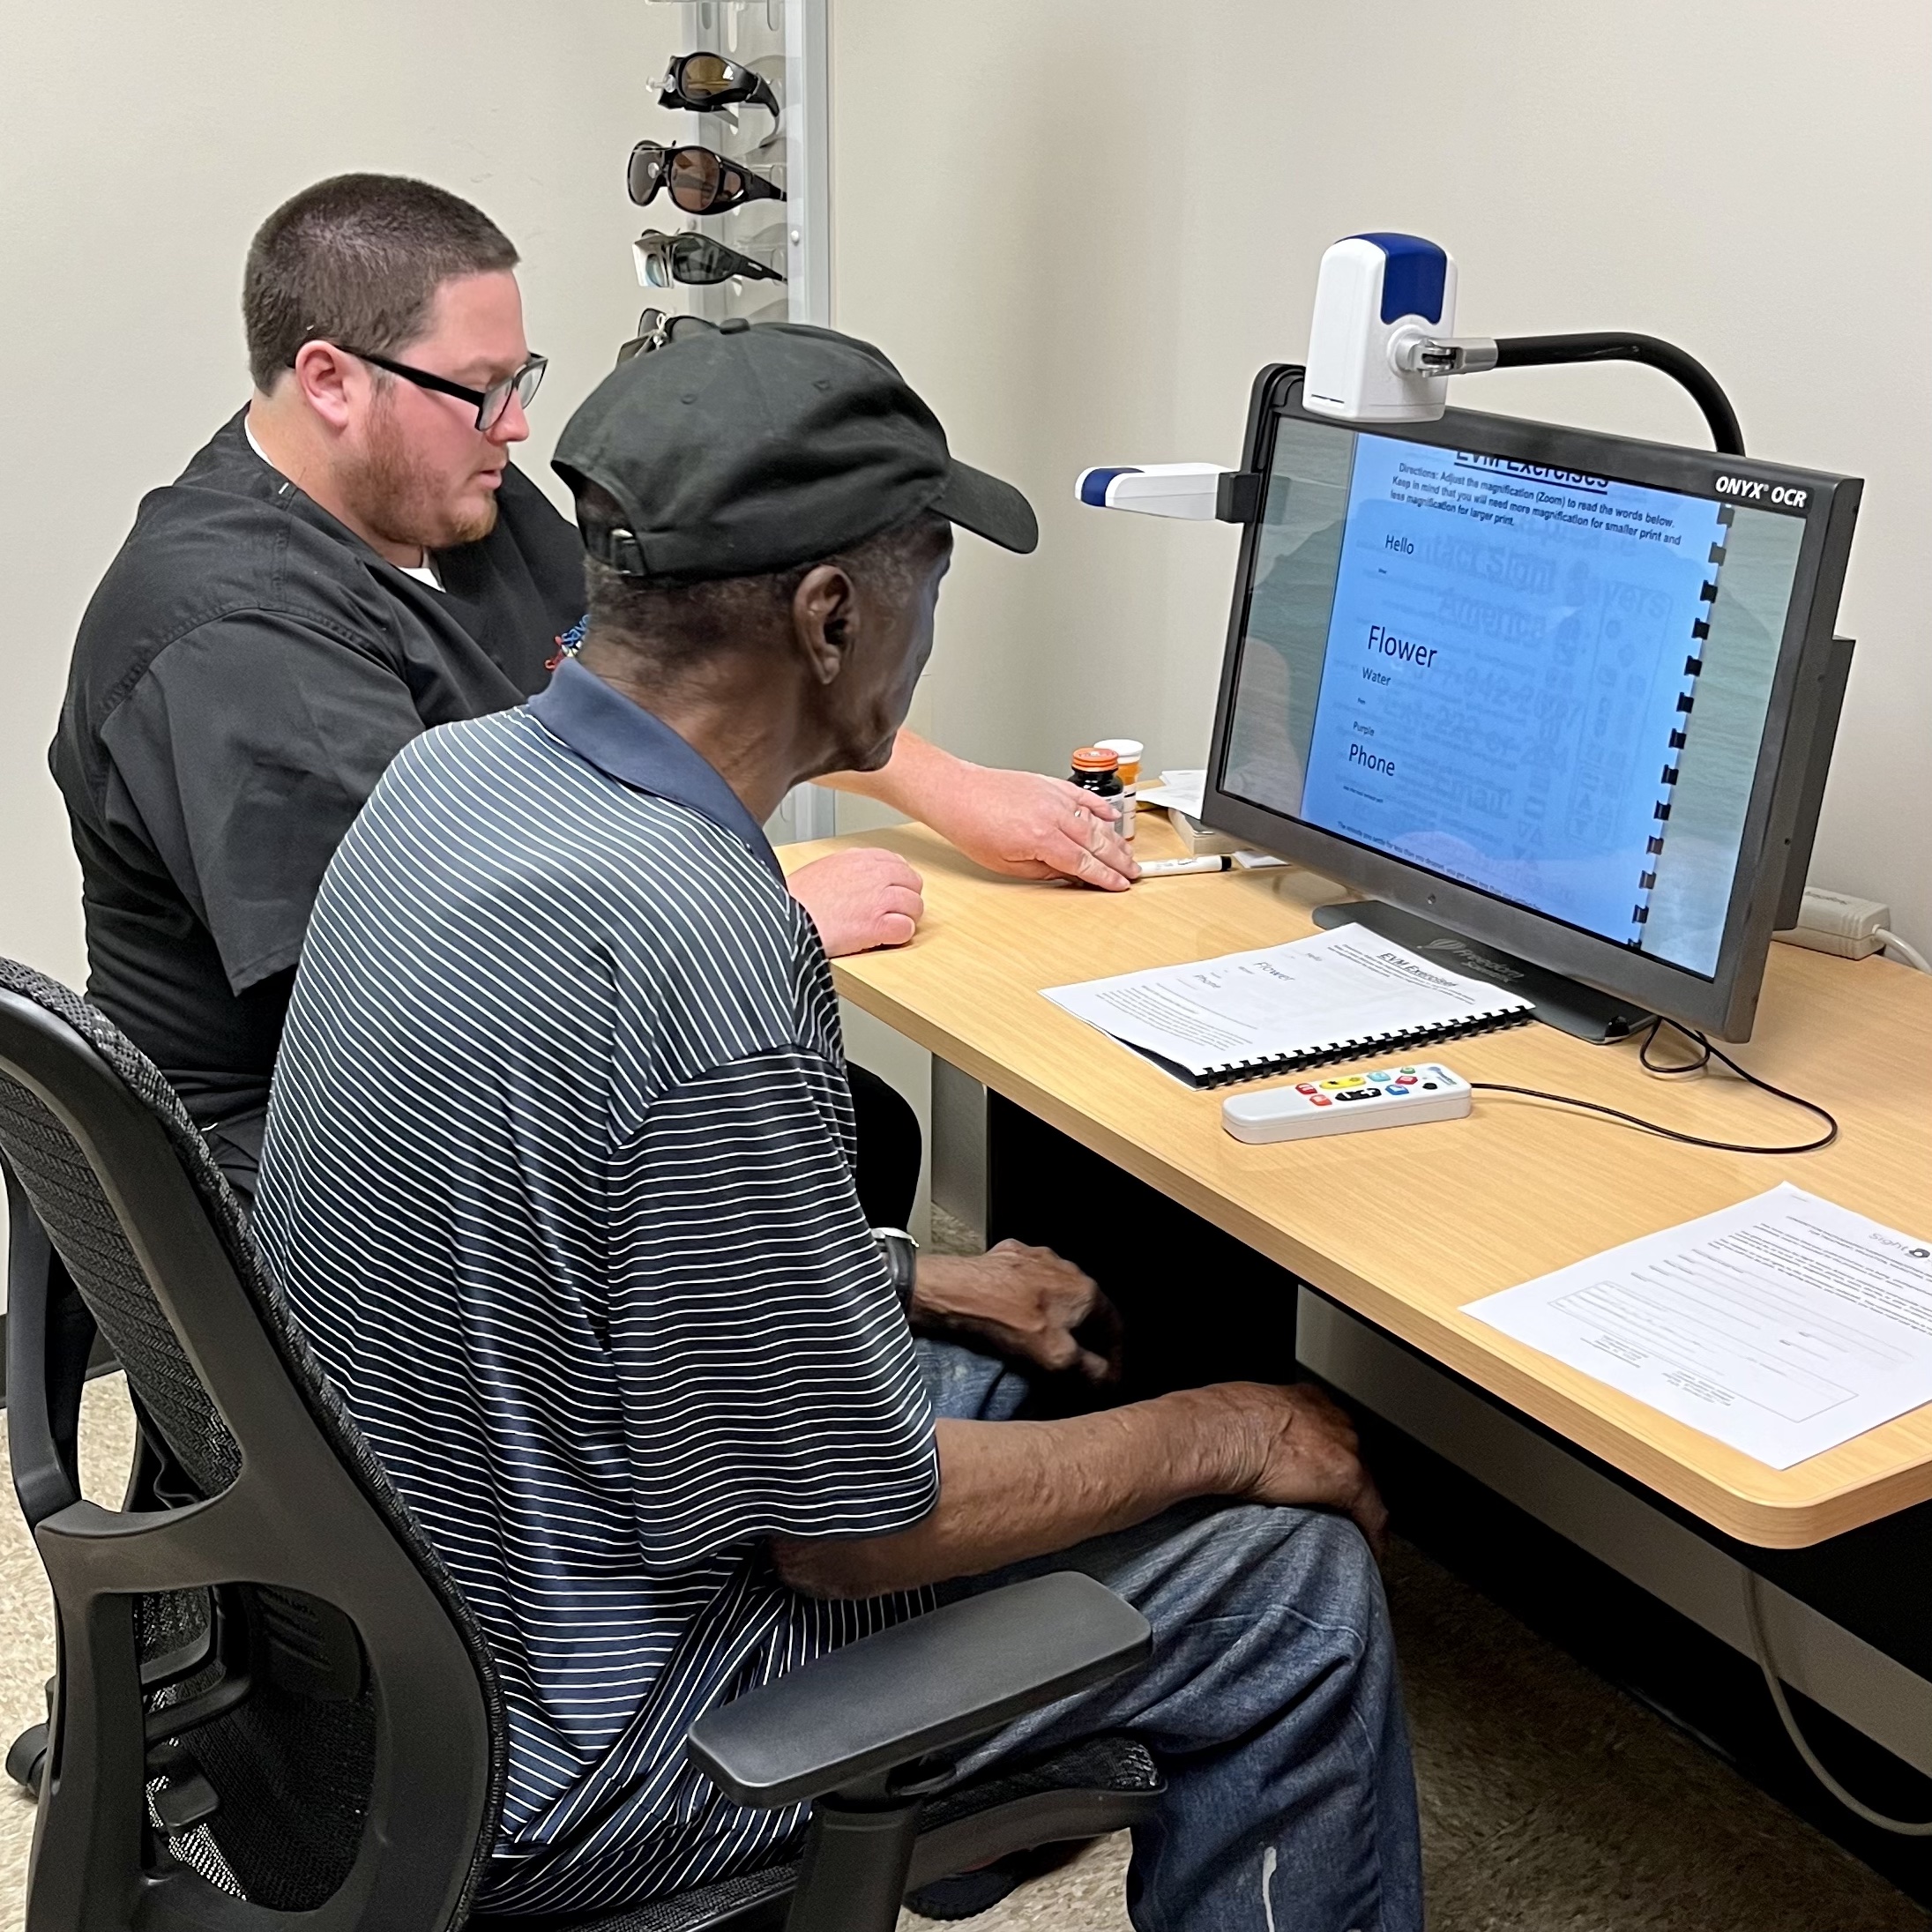 Samuel Kennedy receives training on his new vision aid at the UAB Center for Low Vision Rehabilitation.